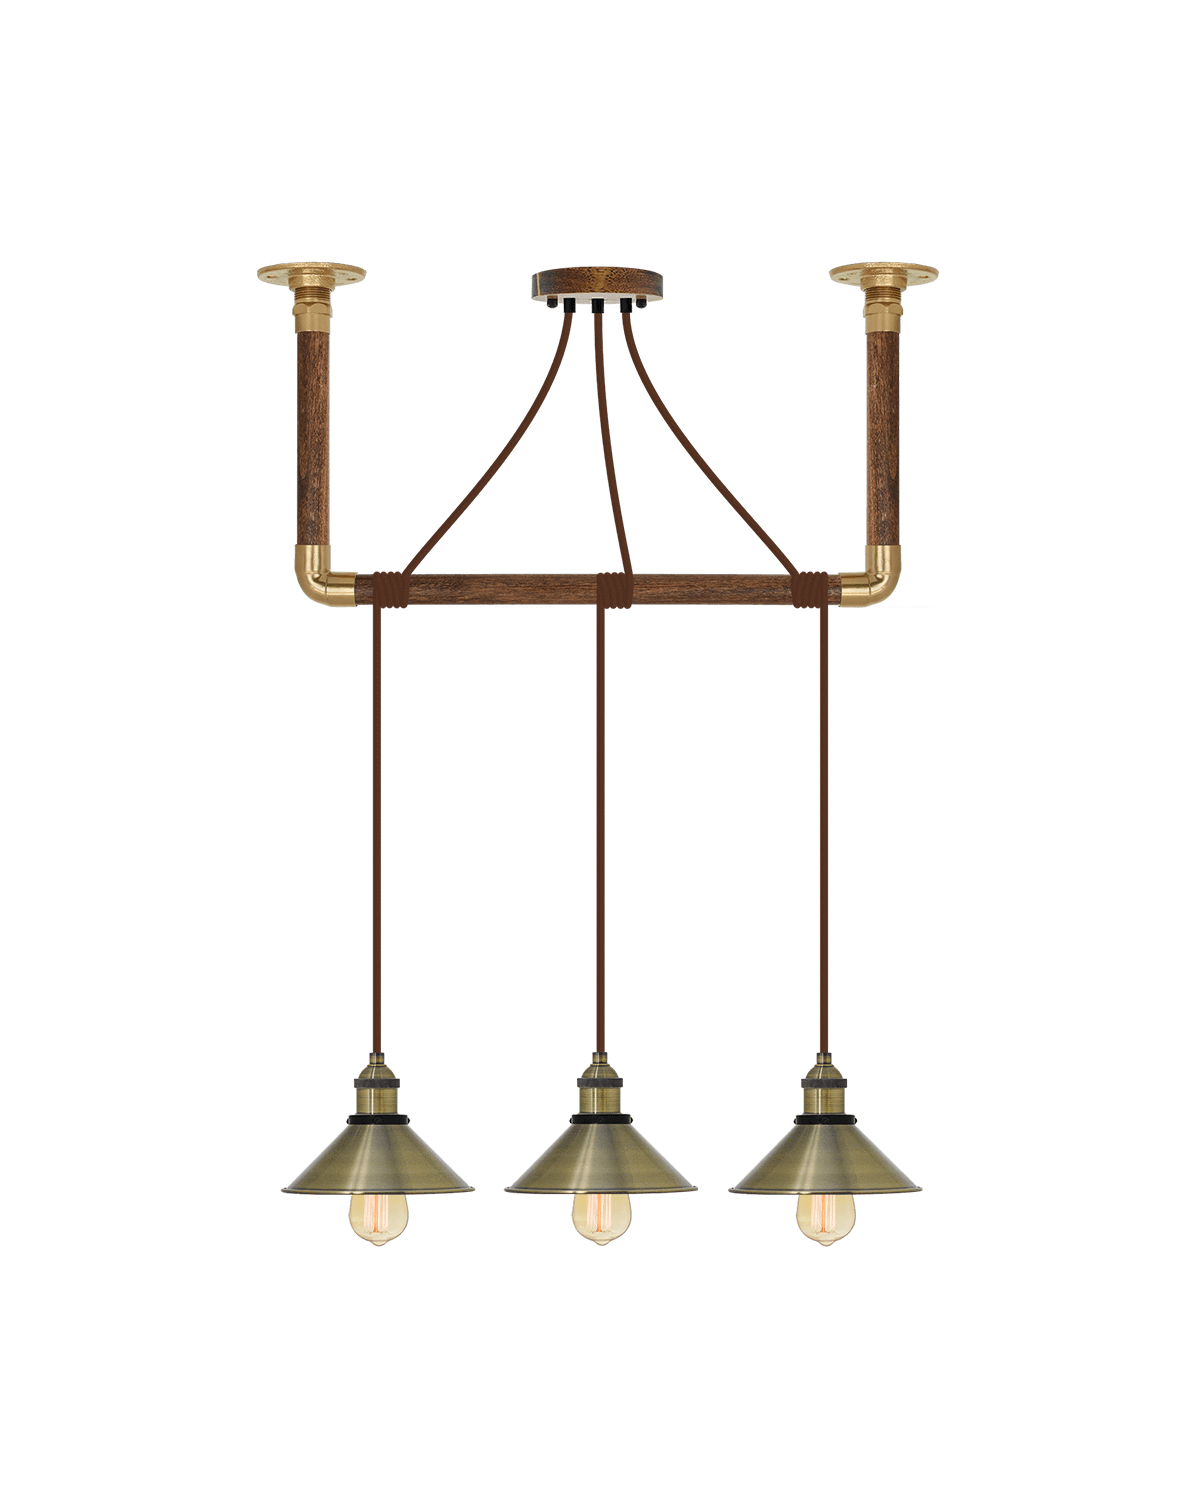 Wrap Chandelier: Brown and Antique Brass Shades Hangout Lighting 3 Pendants